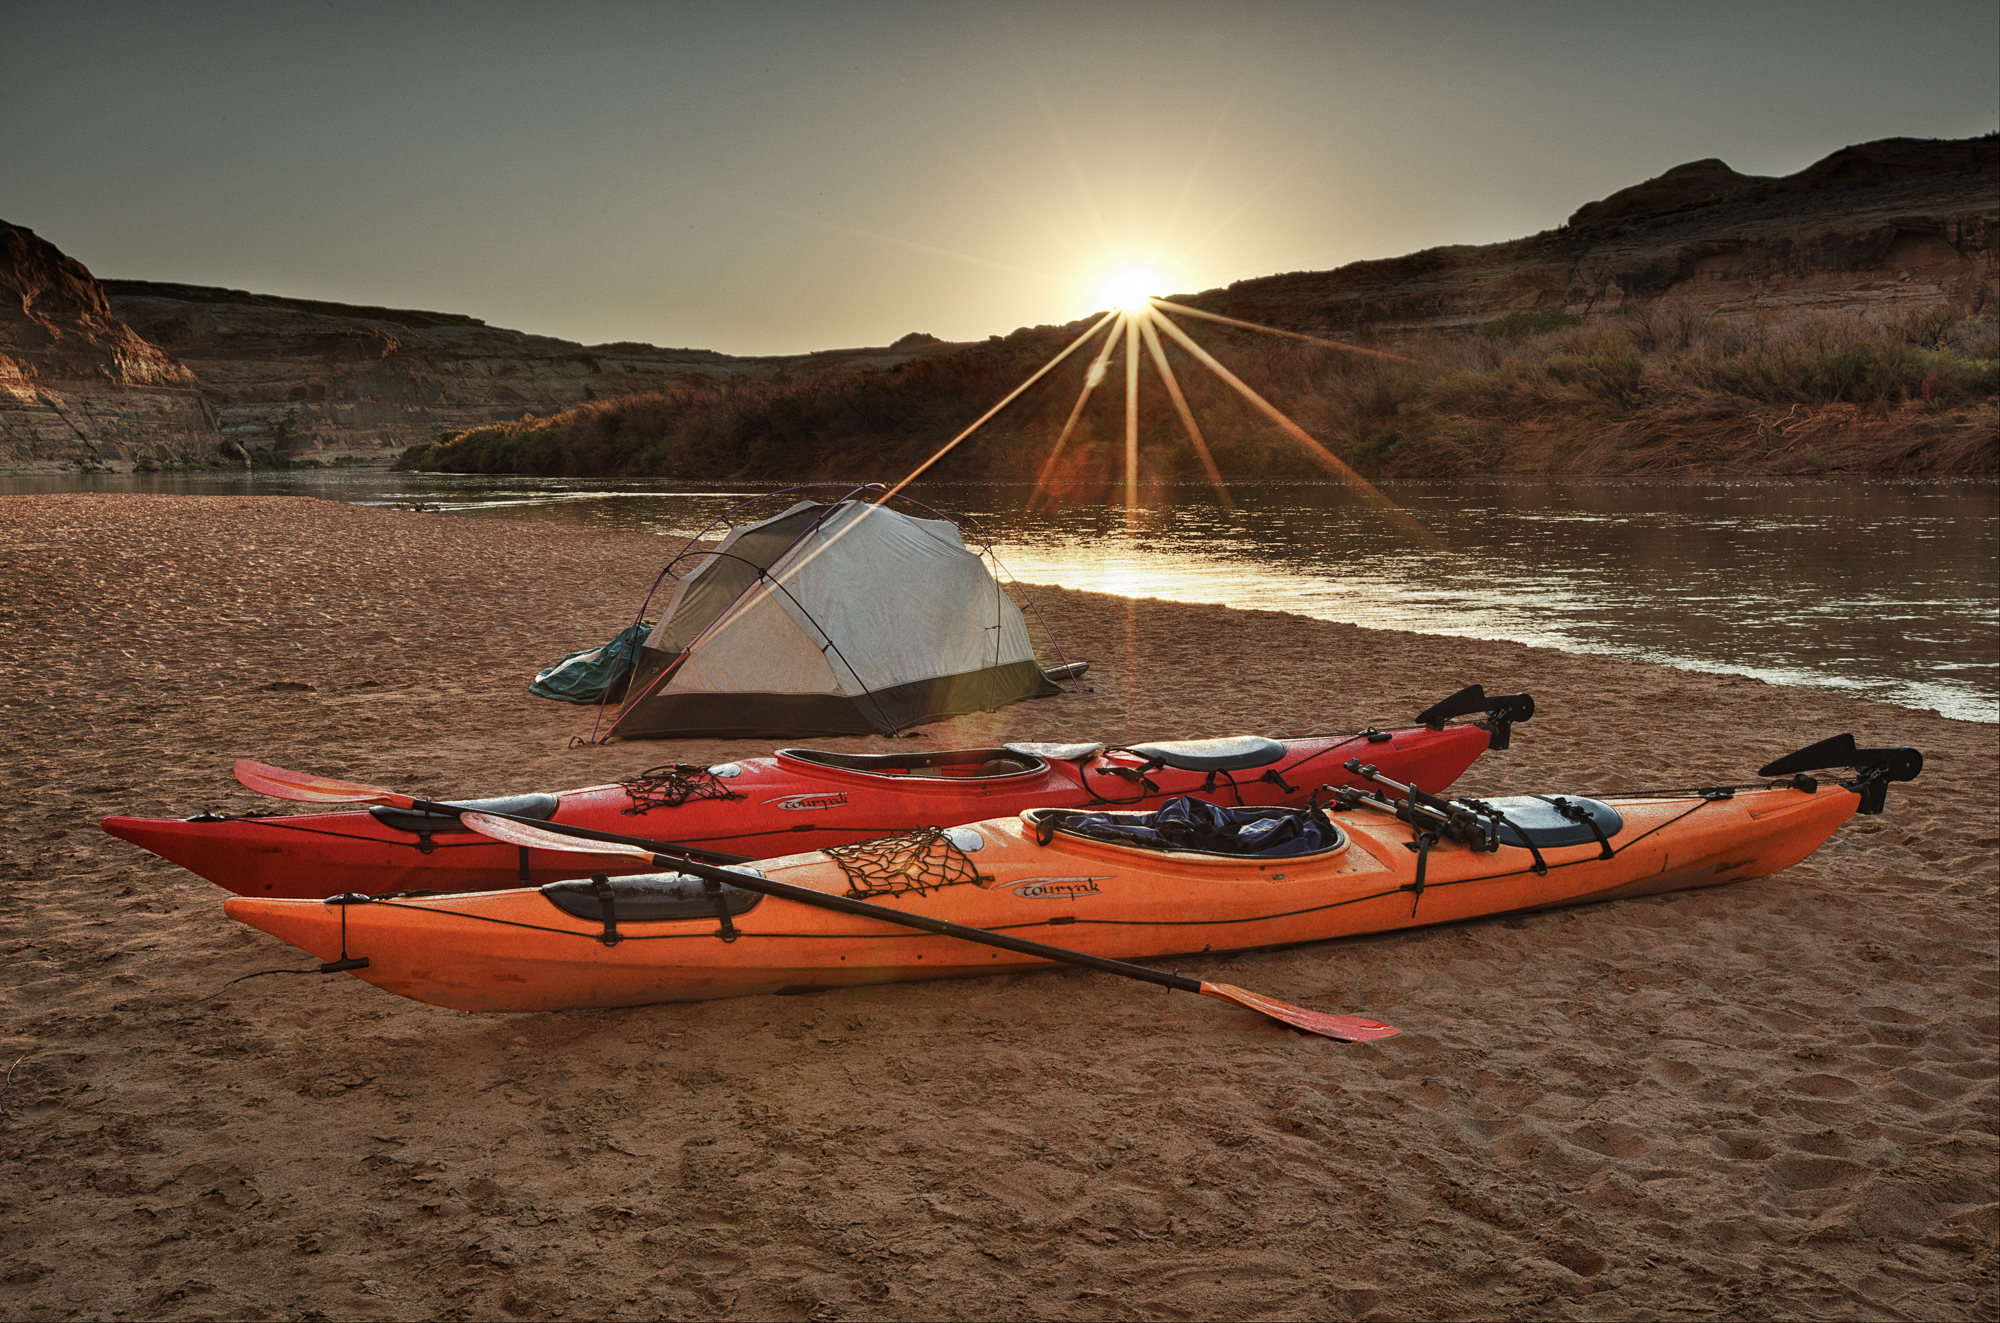 Kayak camp on the Green River, Colorado. This was two different exposures blended together in Photoshop. A tricky shot because I had just a few seconds to nail it before the sun rose above rocks.